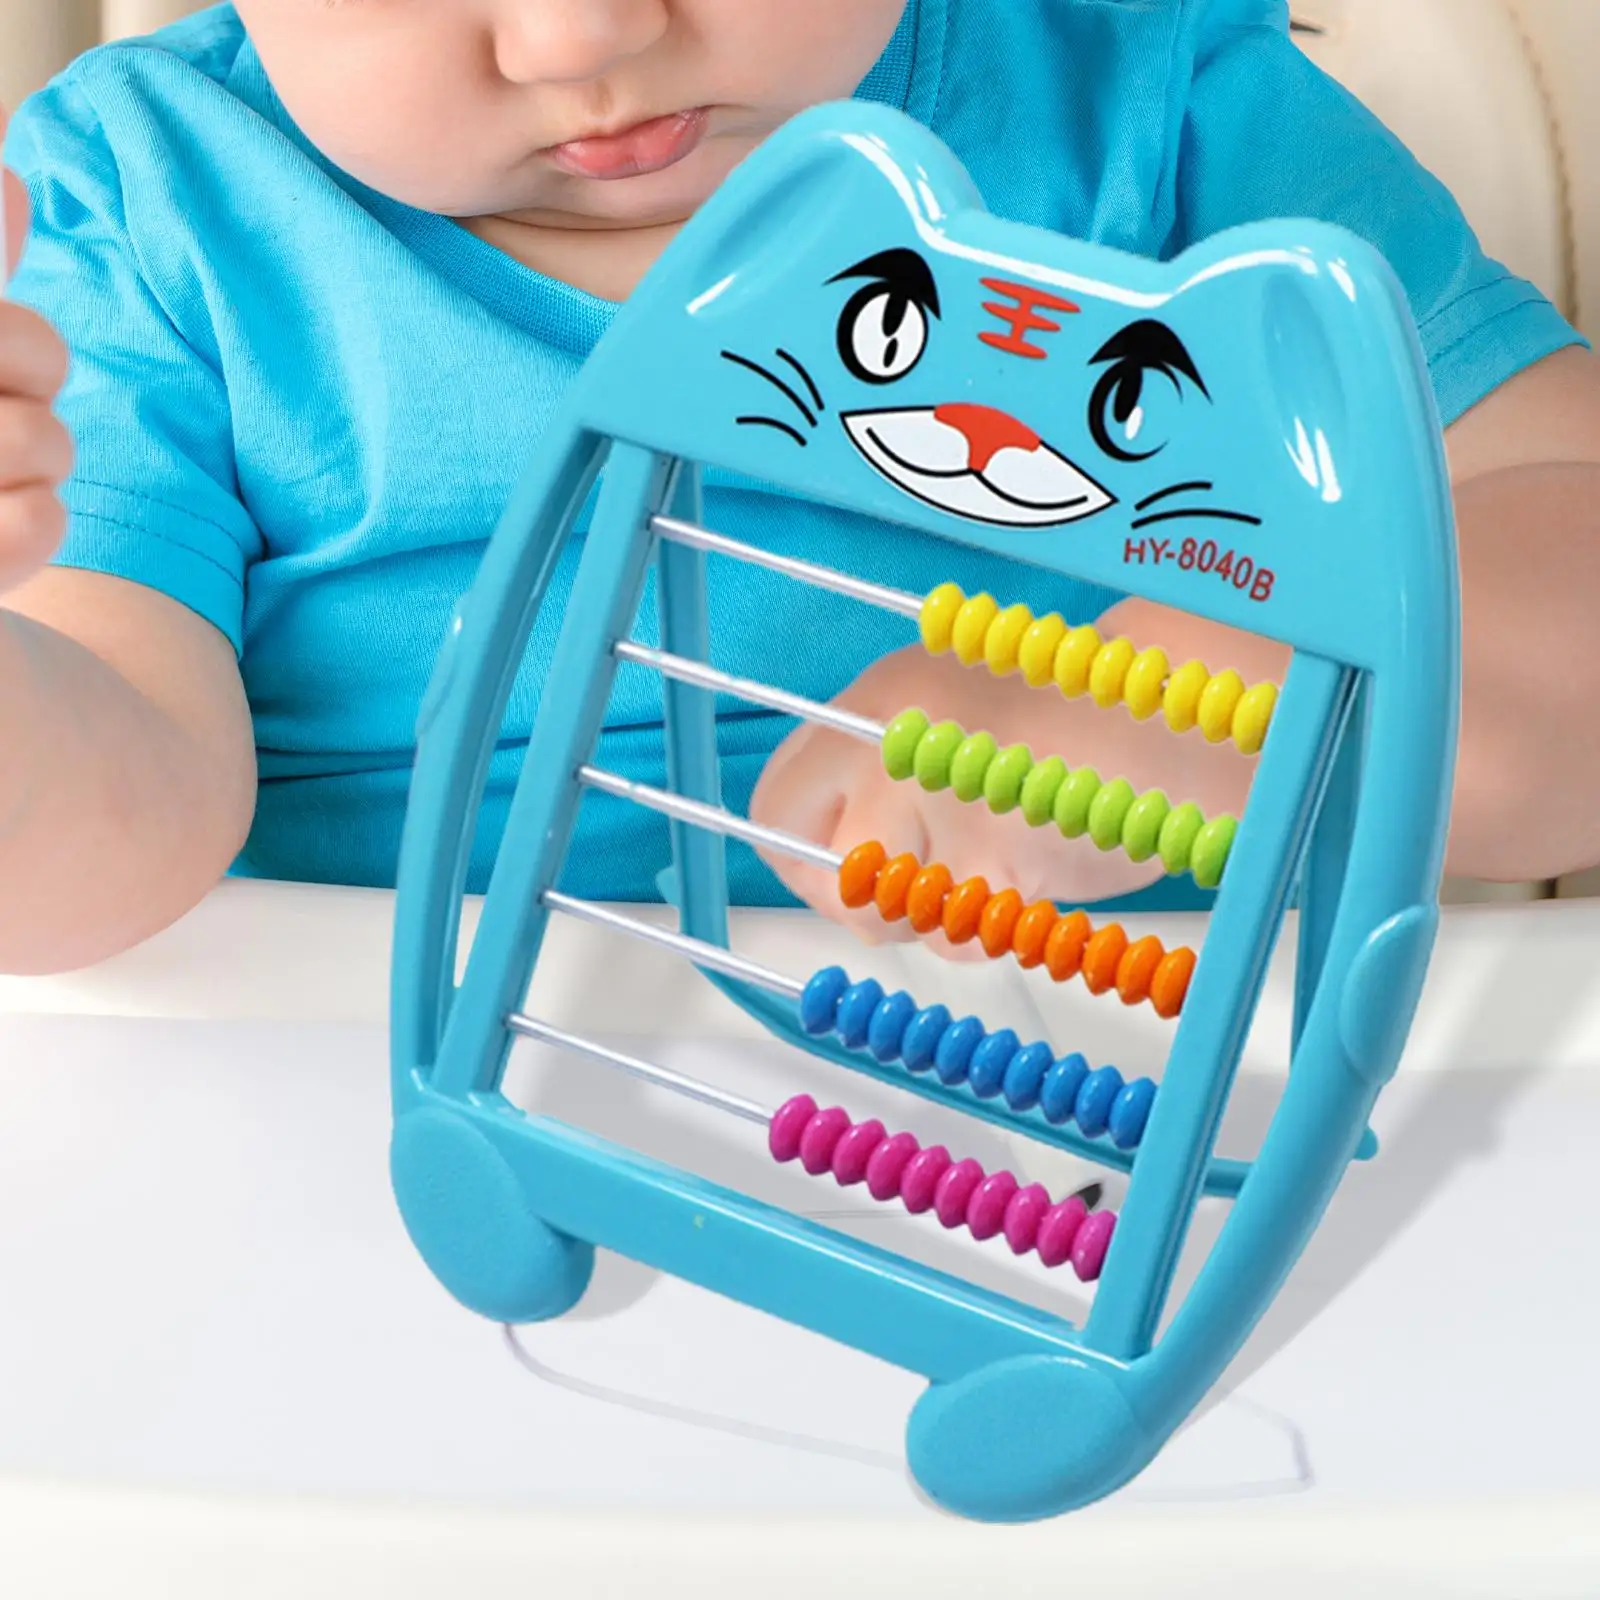 Educational Abacus 5 Row Frame Abacus Educational Counting Frames Toy for Preschool Toddlers Children Girls Birthday Gifts